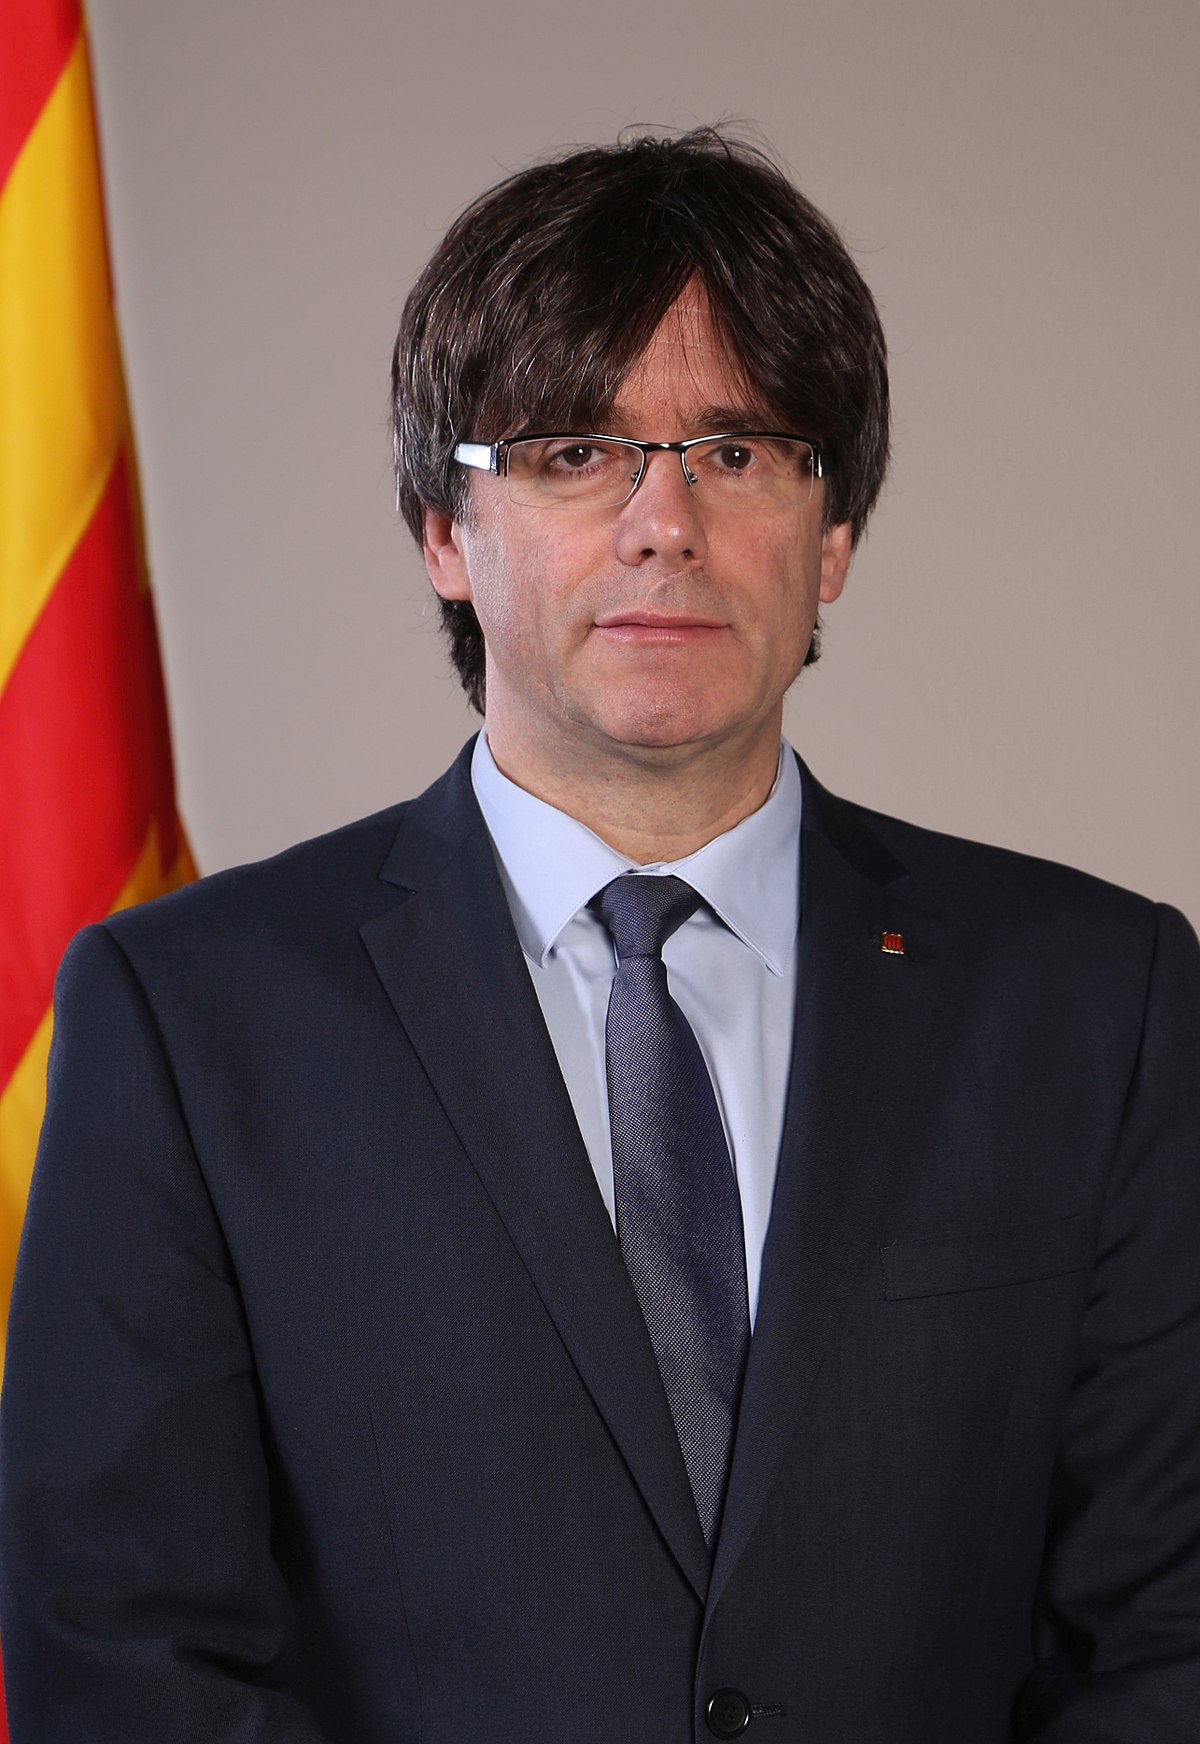 1200px-Retrat_oficial_del_President_Carles_Puigdemont_cropped.jpg